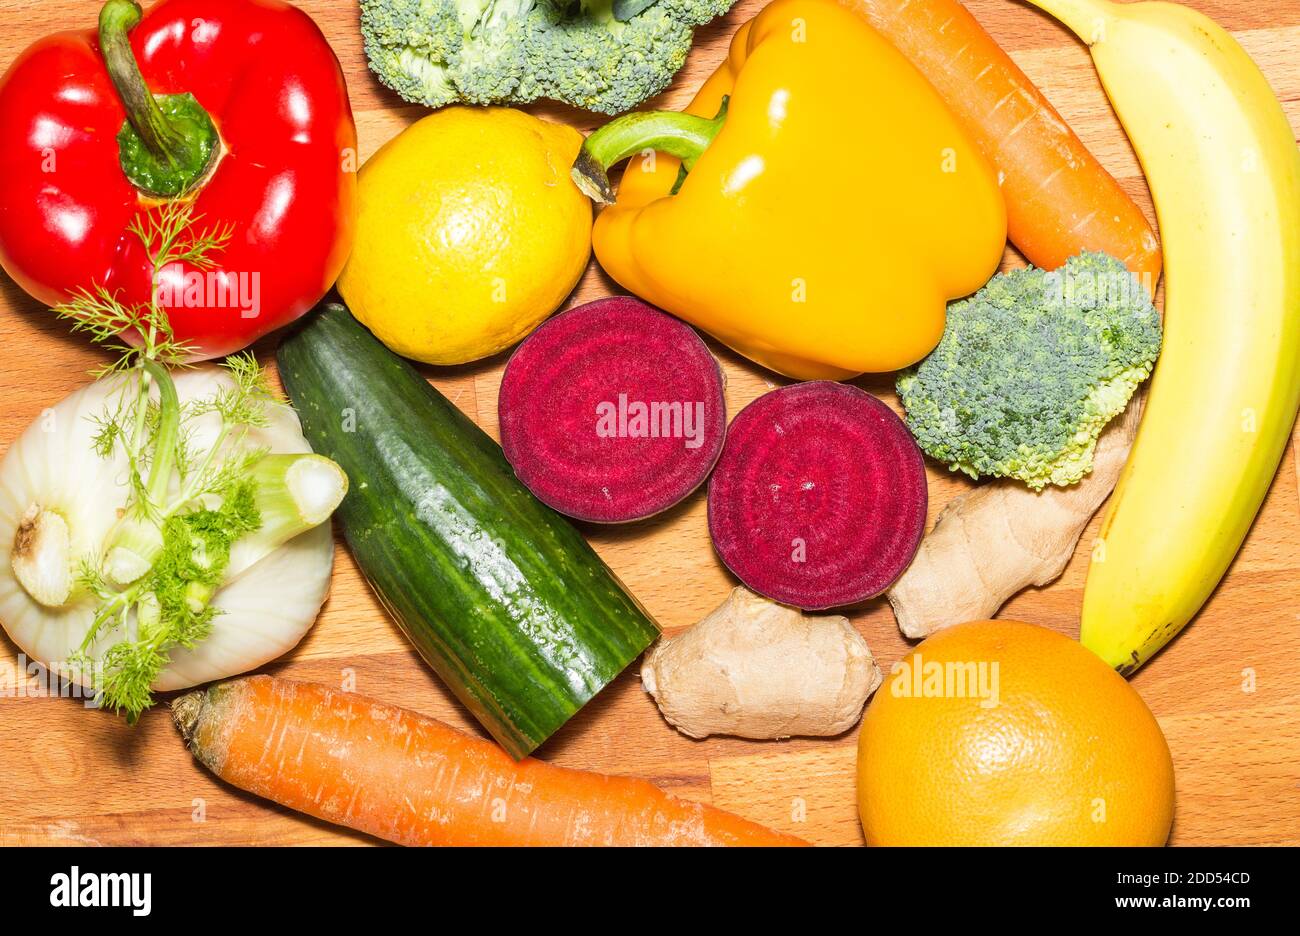 Fruit and vegetables on wooden background Stock Photo